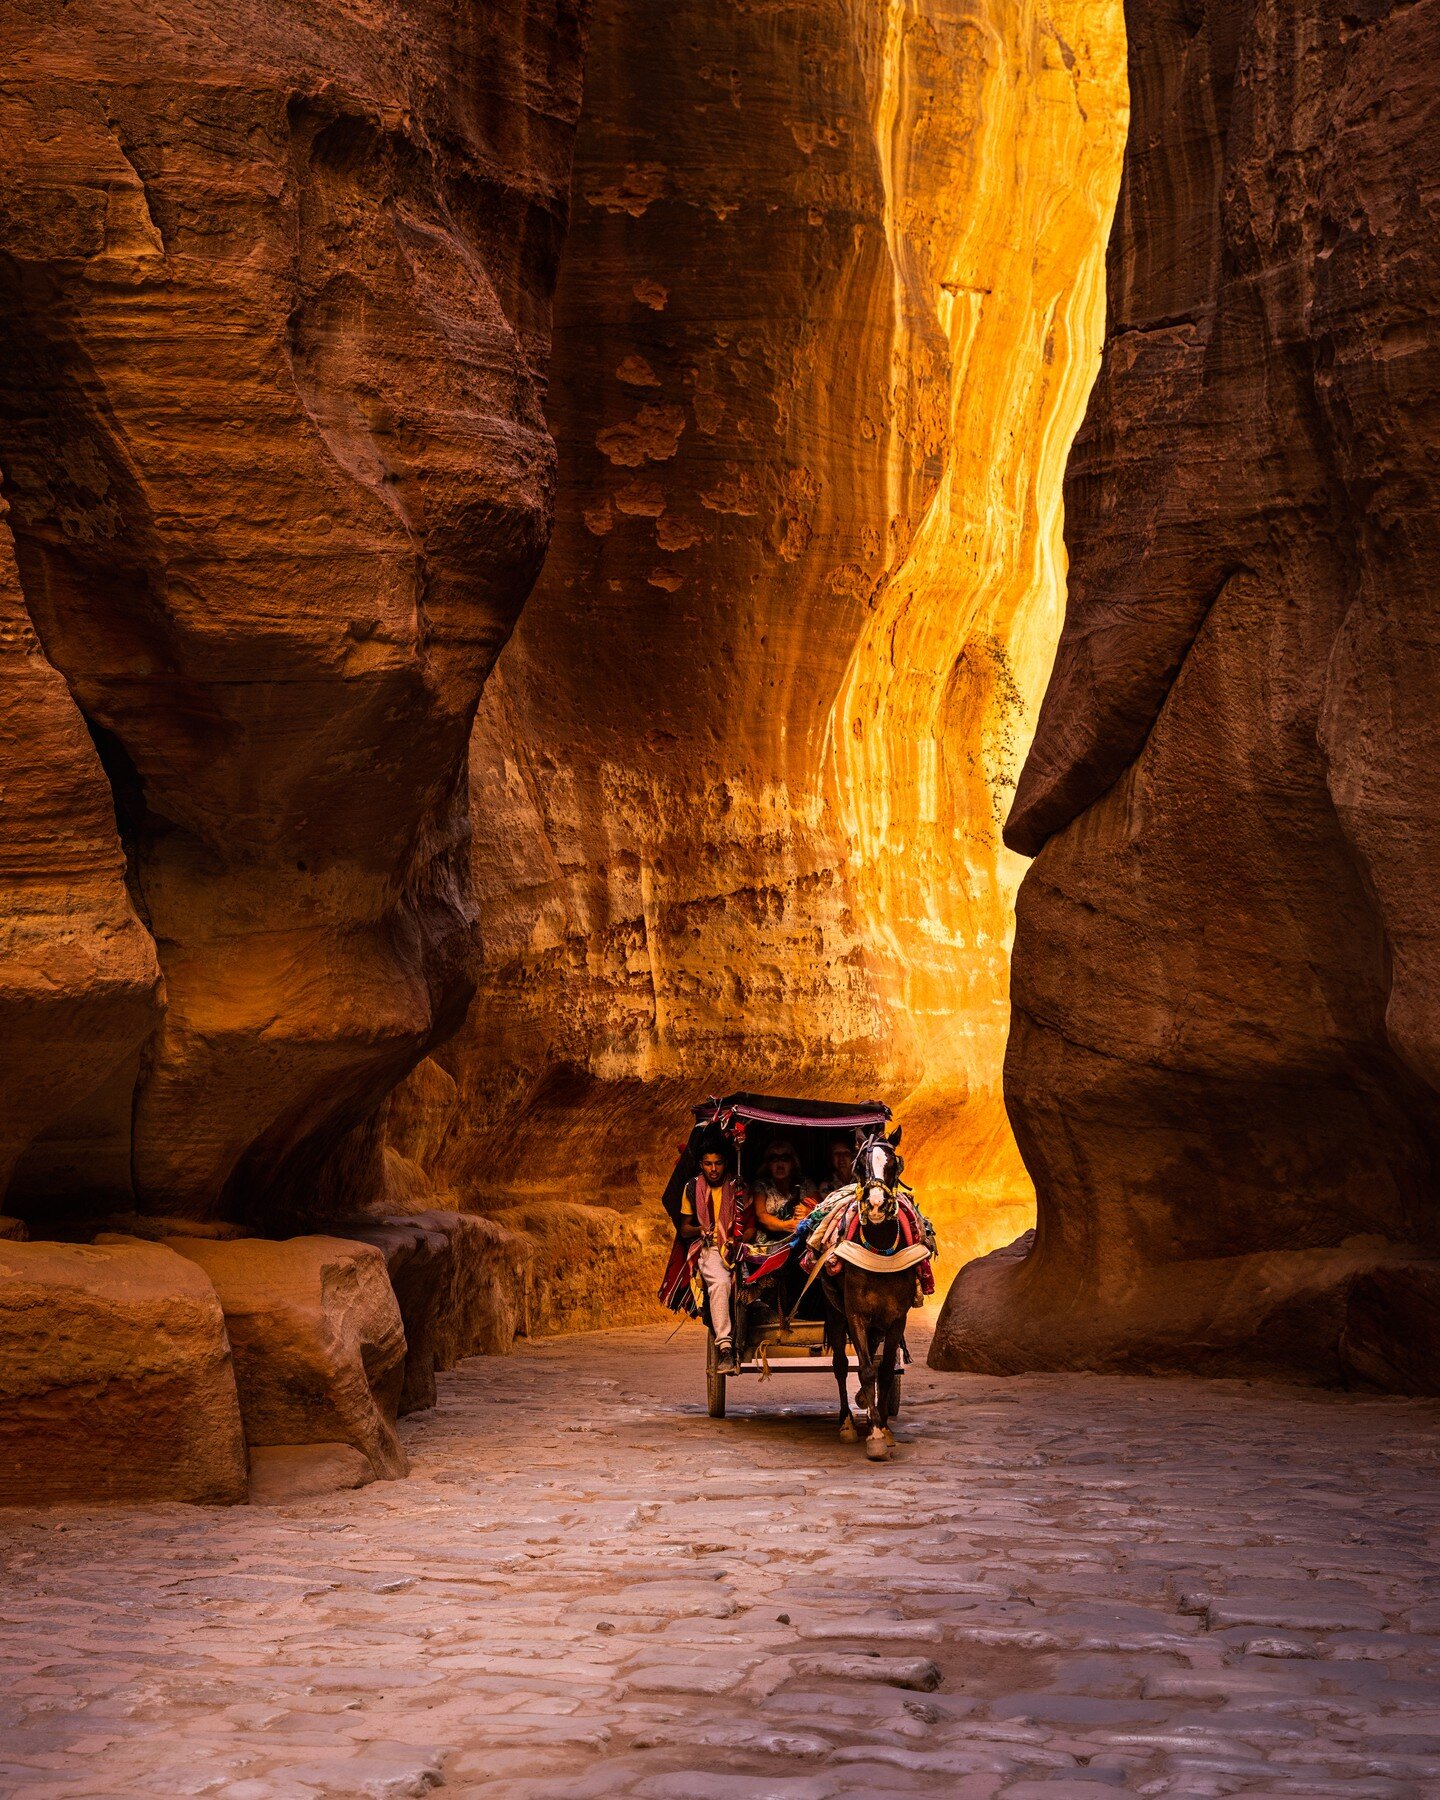 Those moments when you travel that leave you giddy. The walk from town into Petra is amazing - the ancient slot canyon is gorgeous and we had fantastic afternoon light bouncing around, every turn offered something new. About 1/2 way in we spent some 